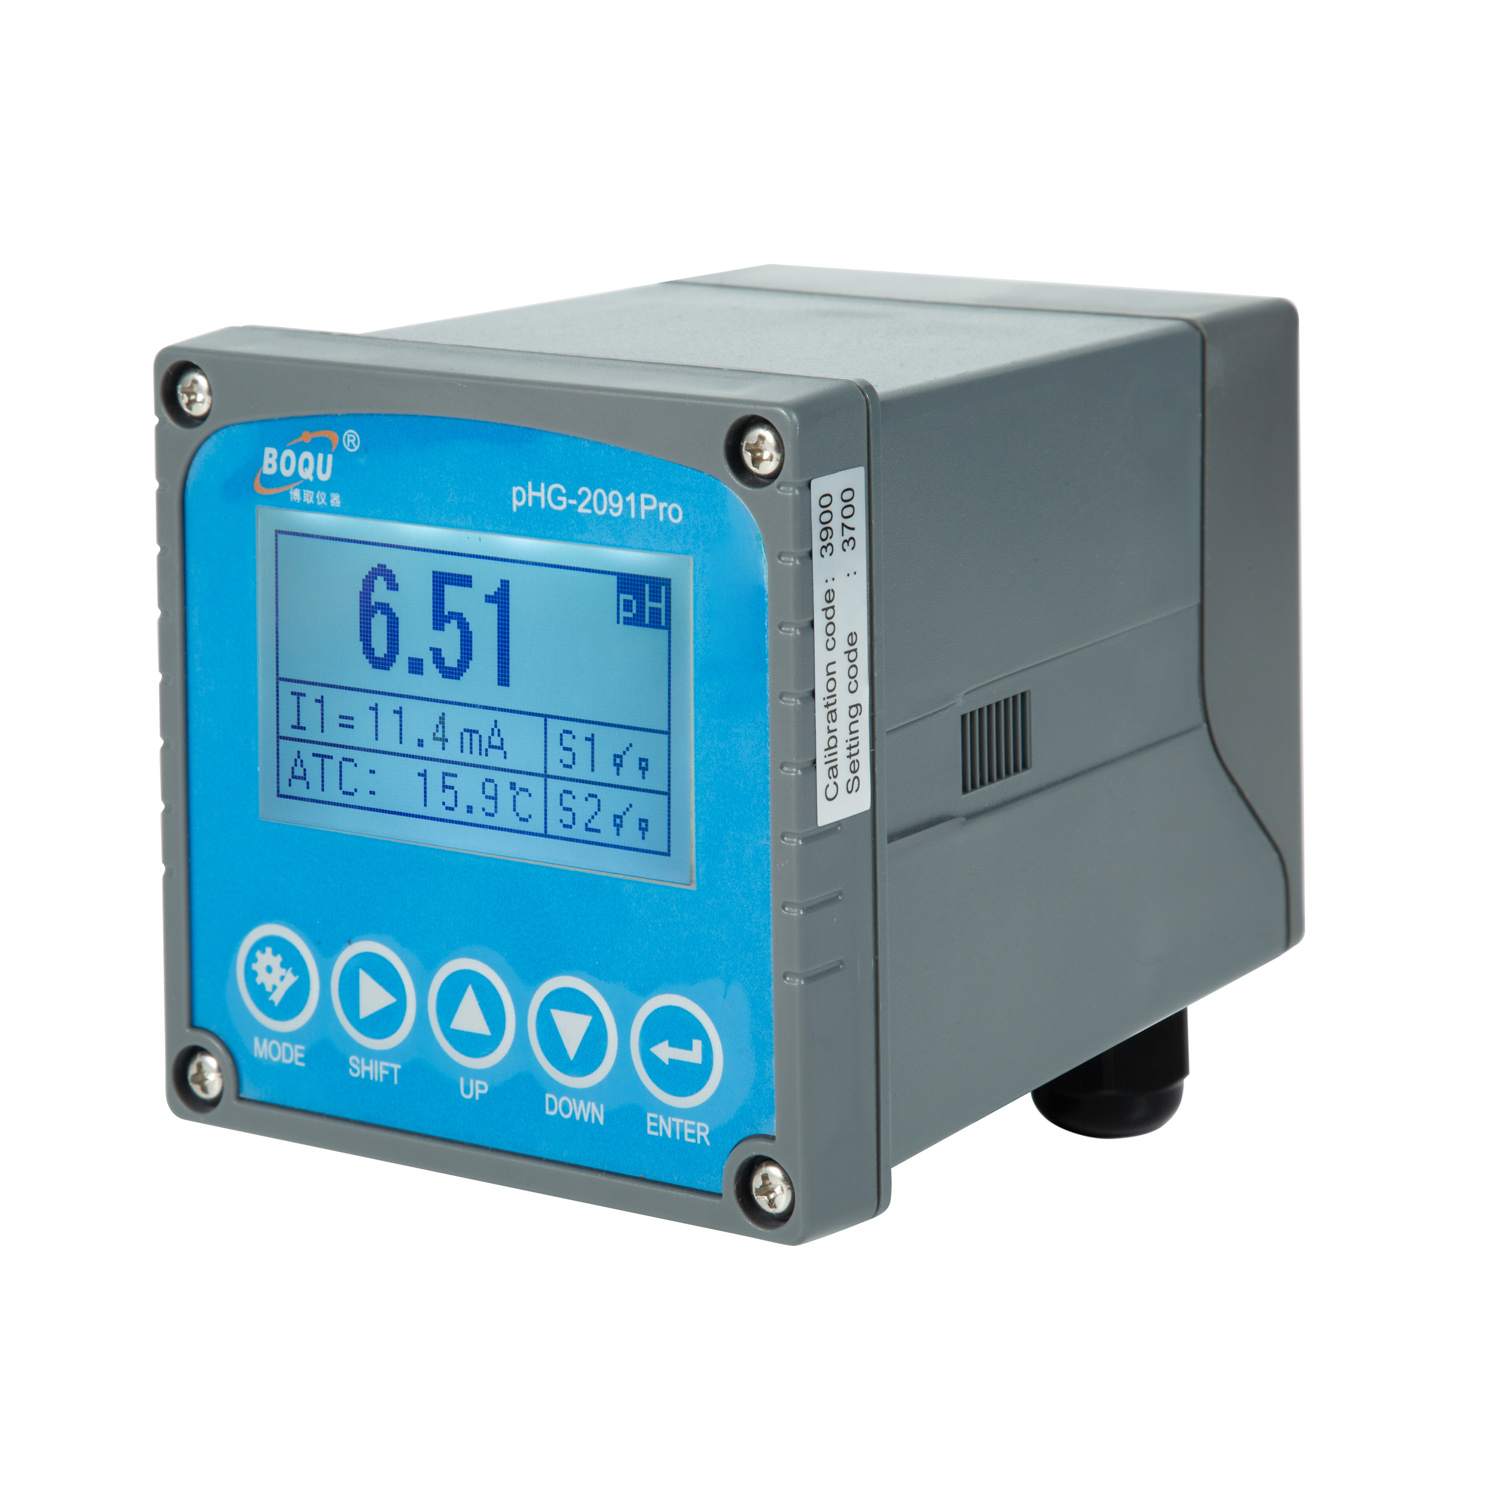 China Wholesale Ph And Dissolved Oxygen Meter Suppliers Factories - New Online pH&ORP Meter  – BOQU